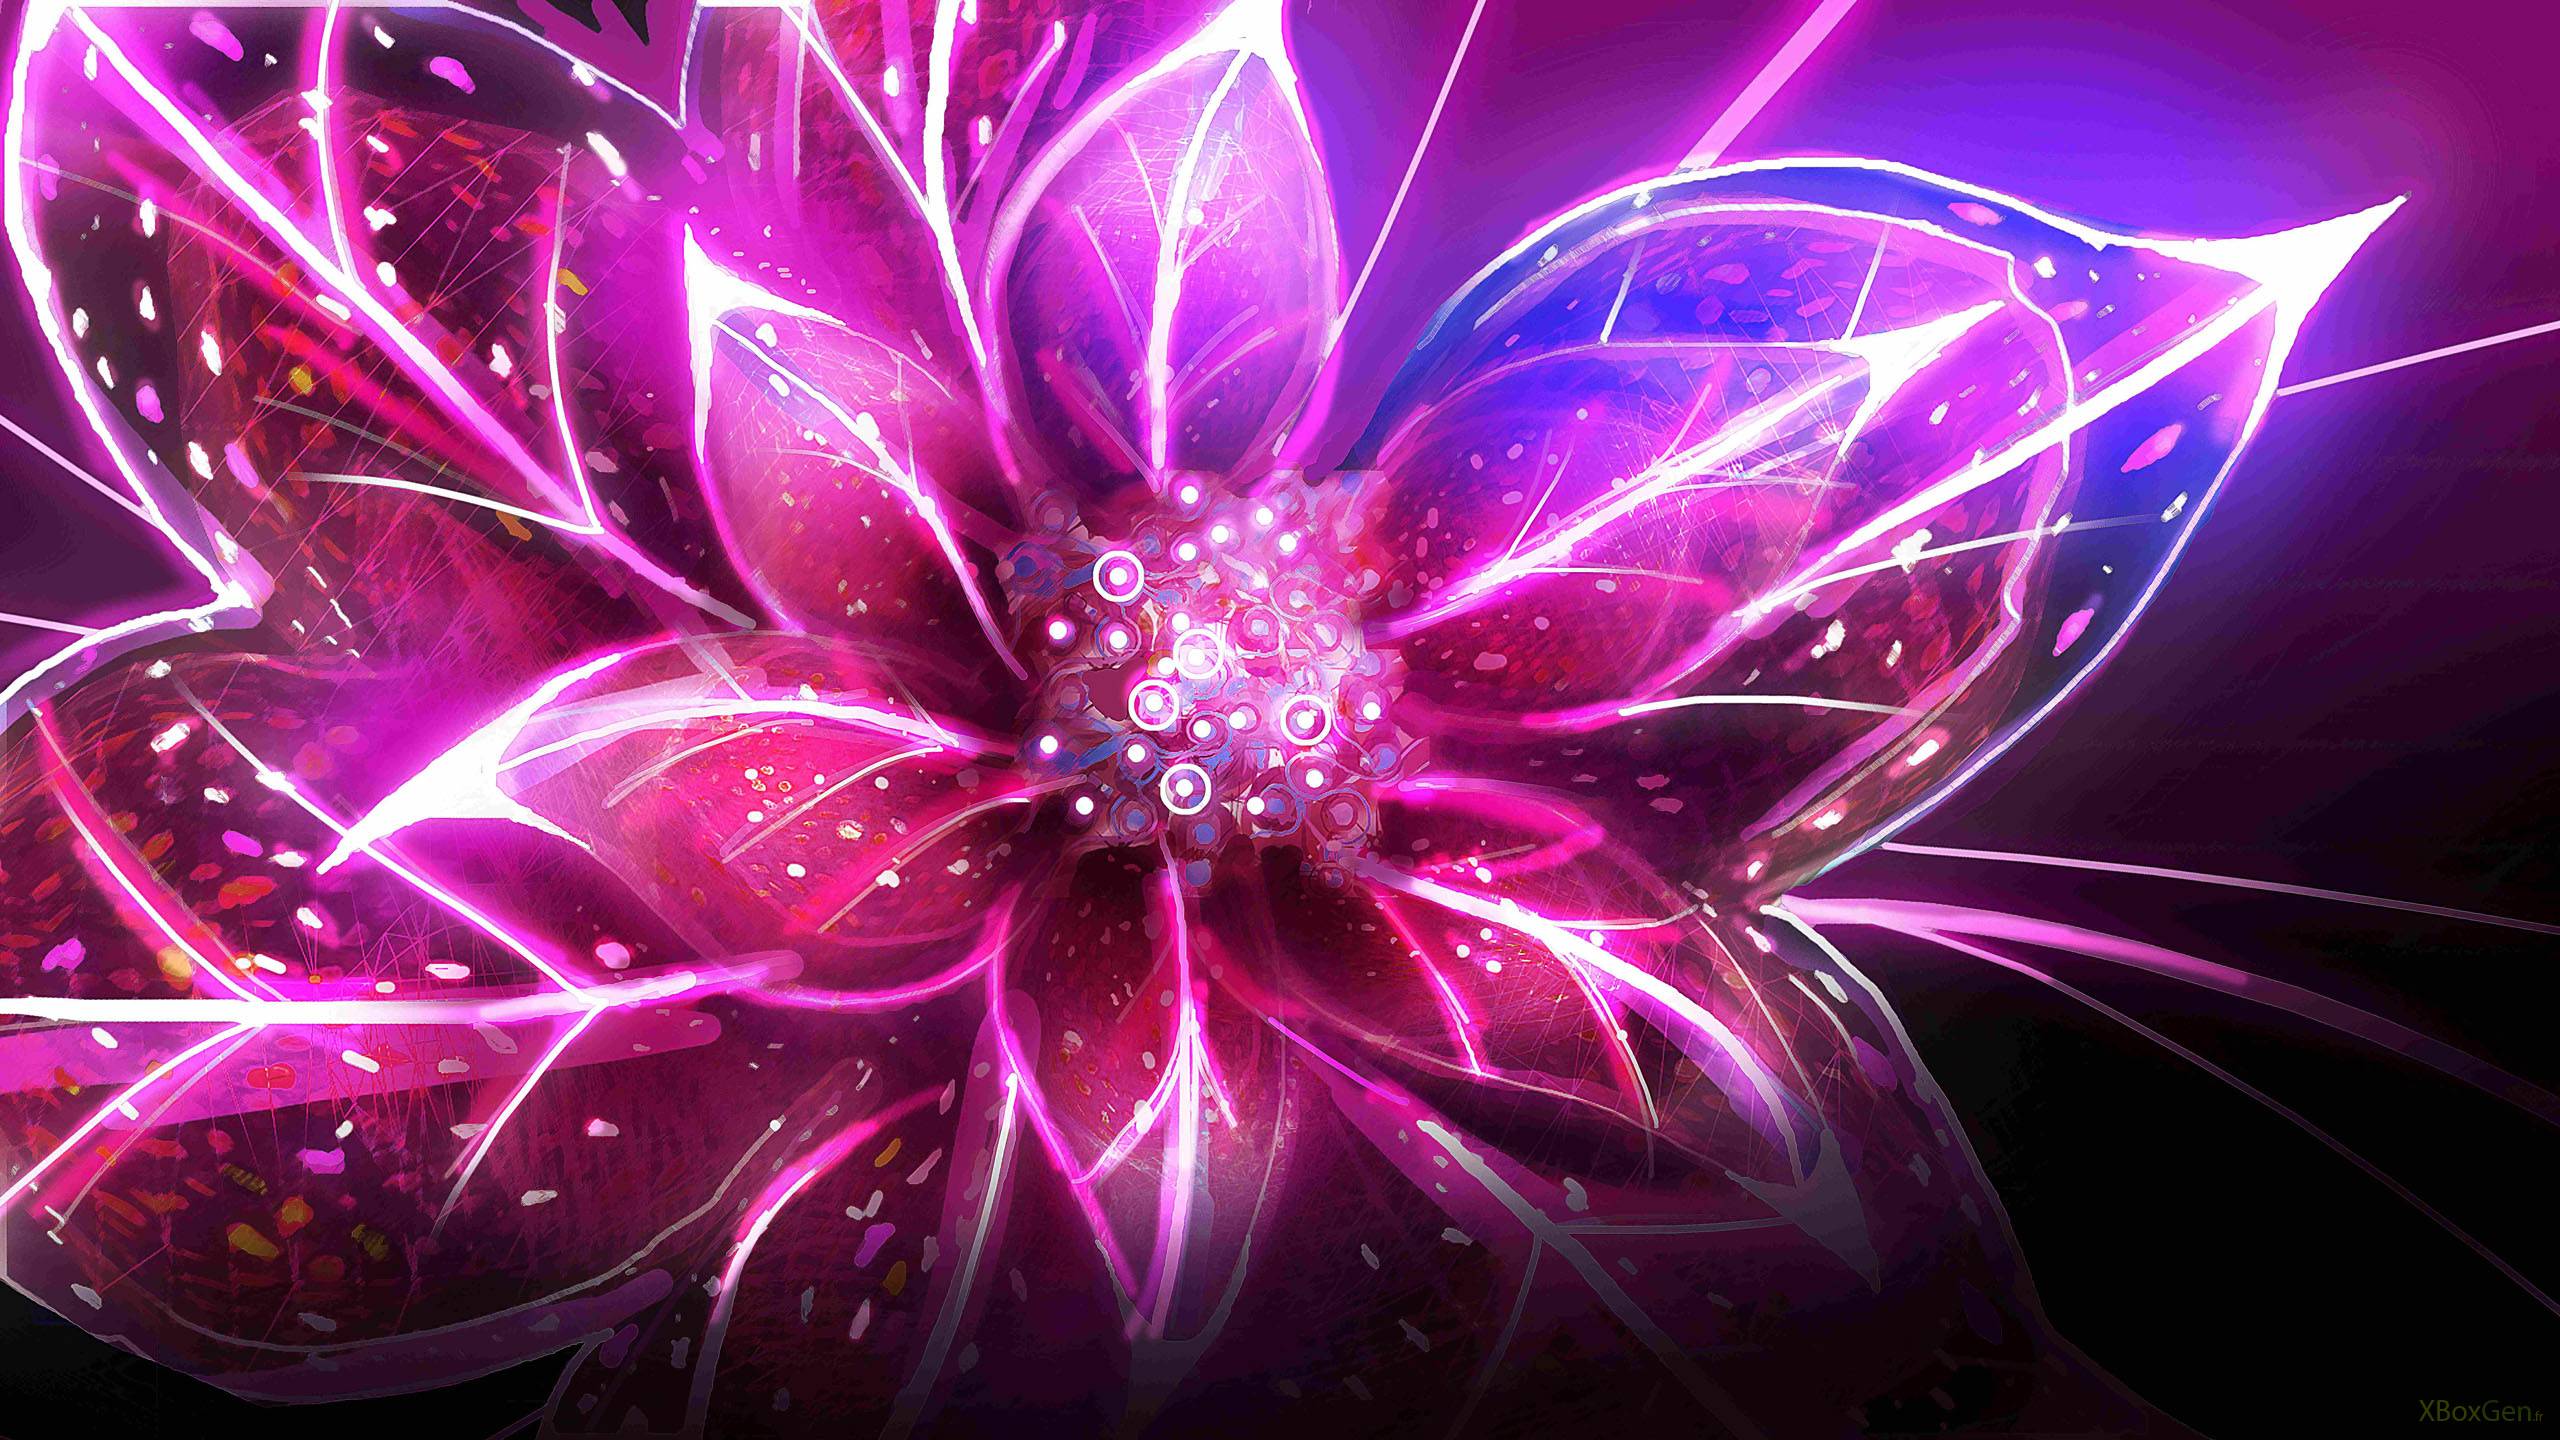 20+ Cool Flower Backgrounds | Wallpapers | Free Creatives